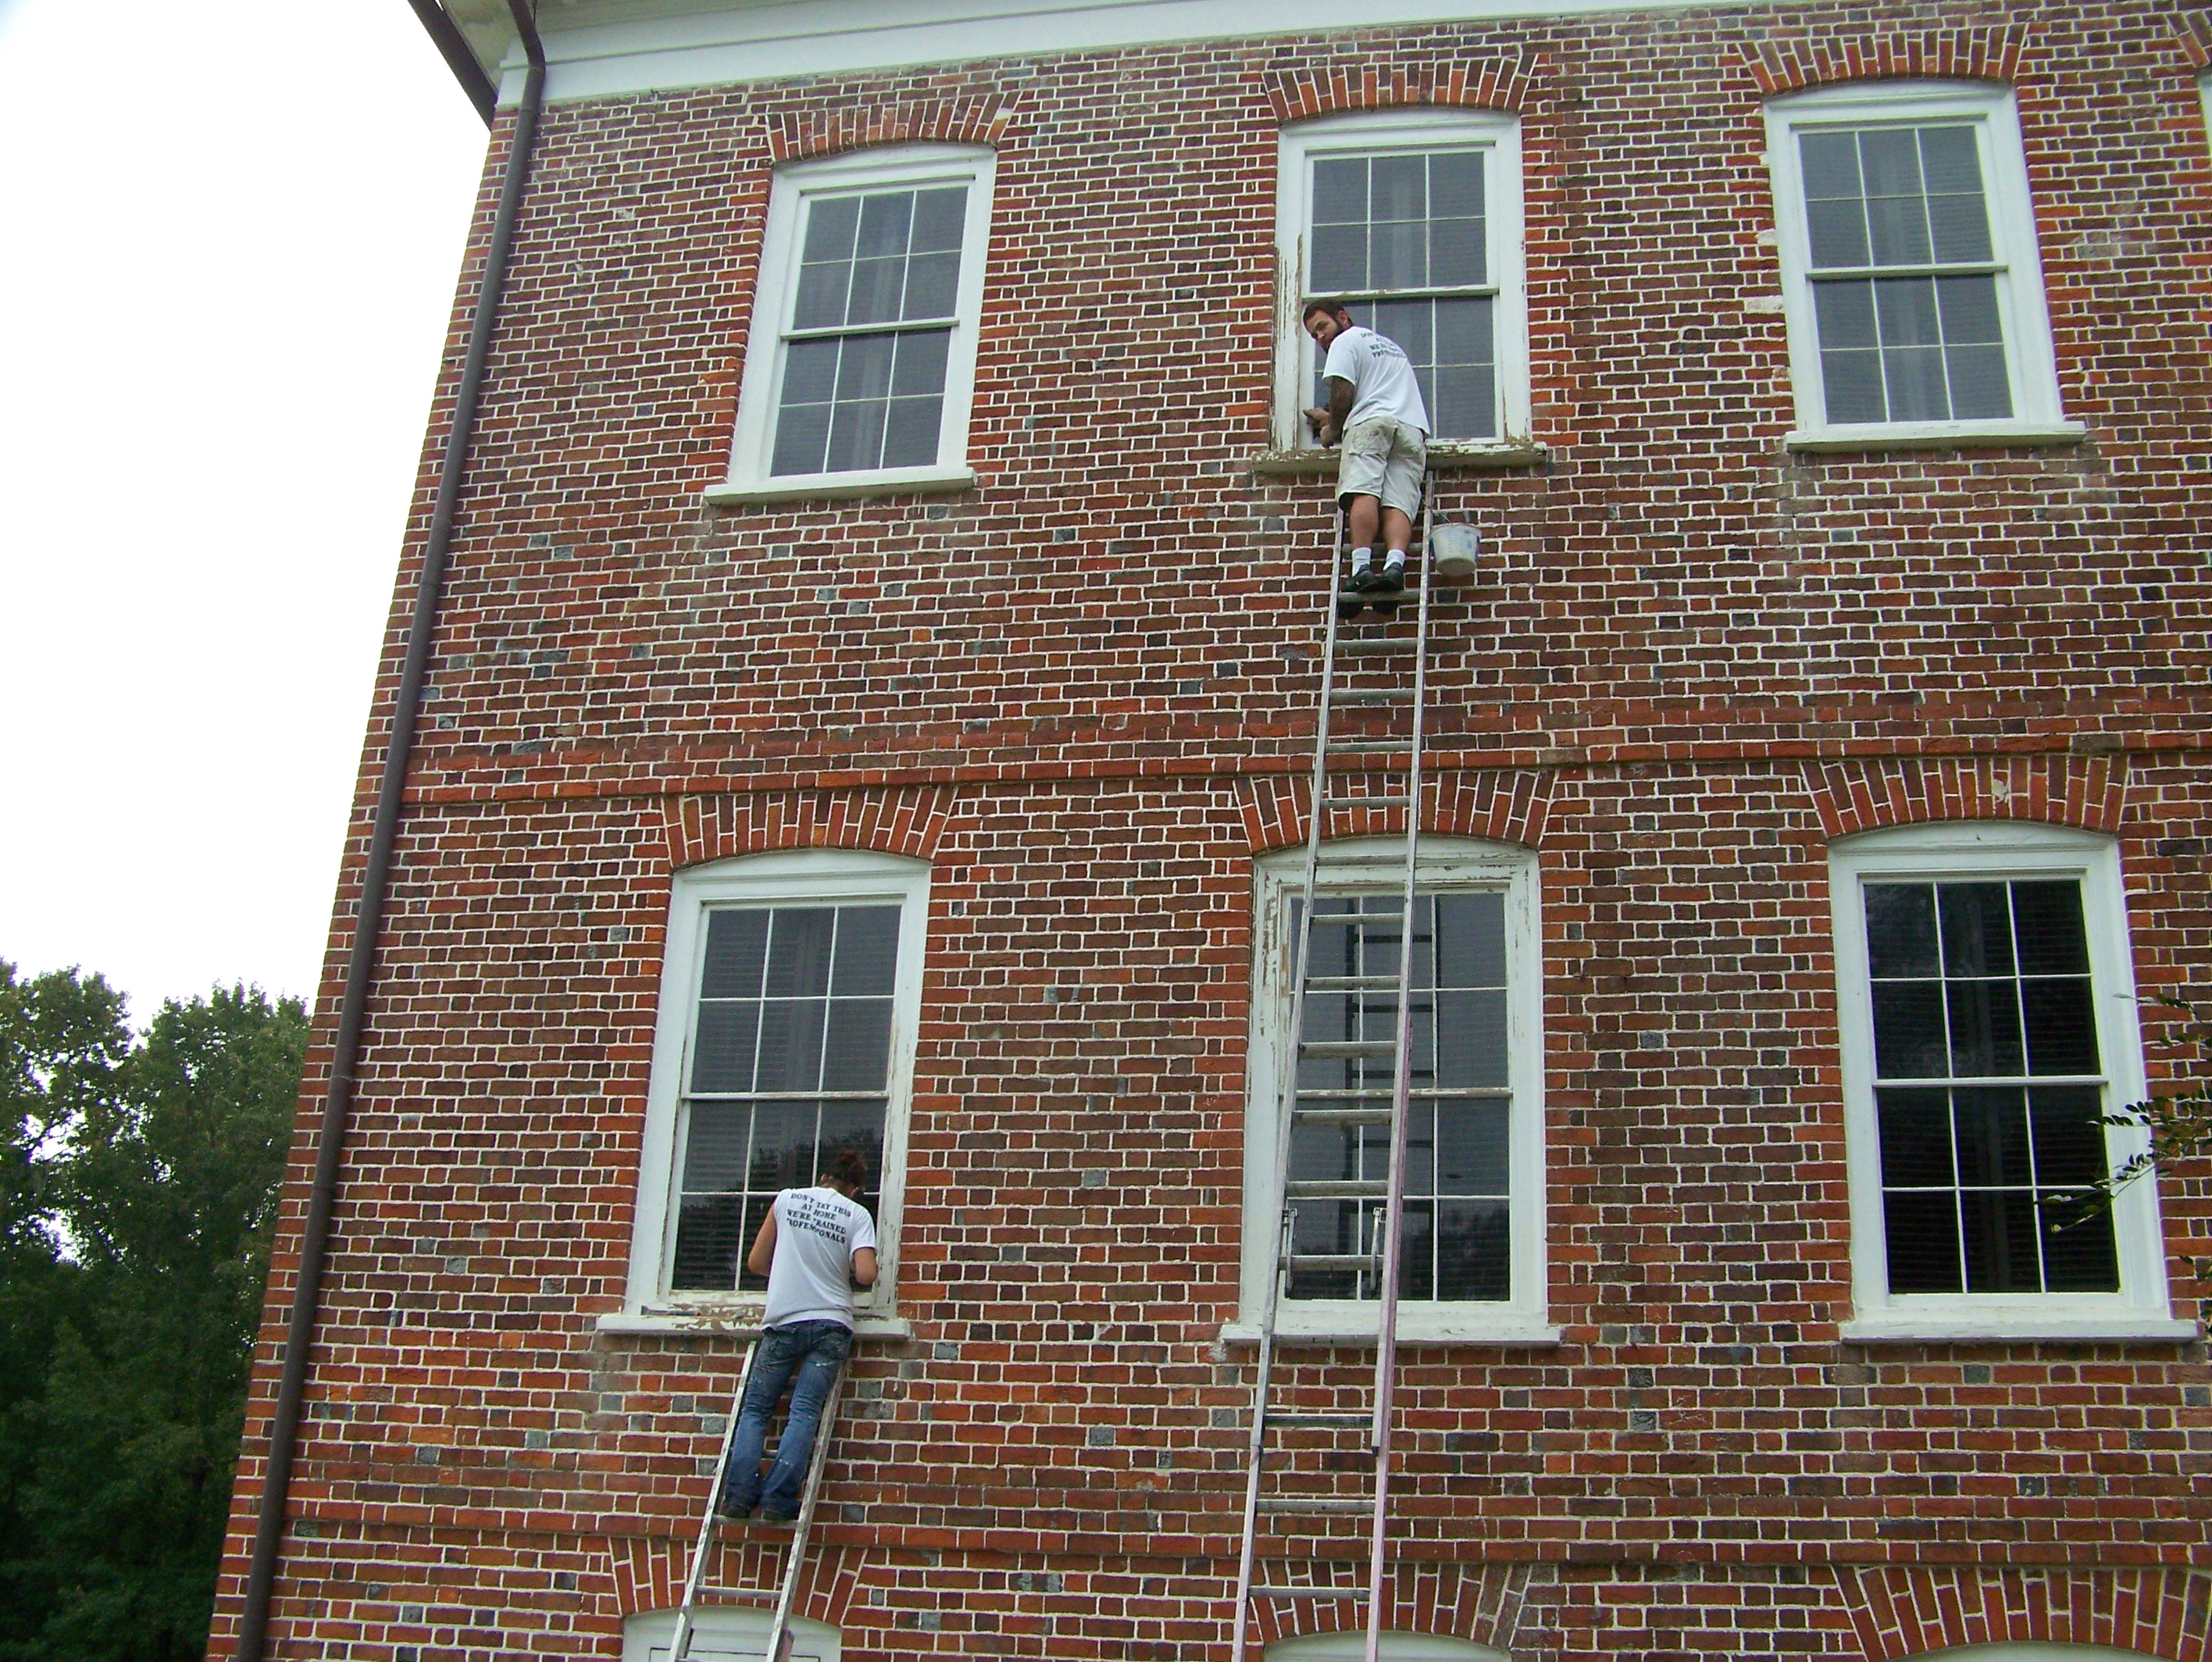 While work continues on the portico, preservation craftsmen will be repainting and repairing the historic windows.